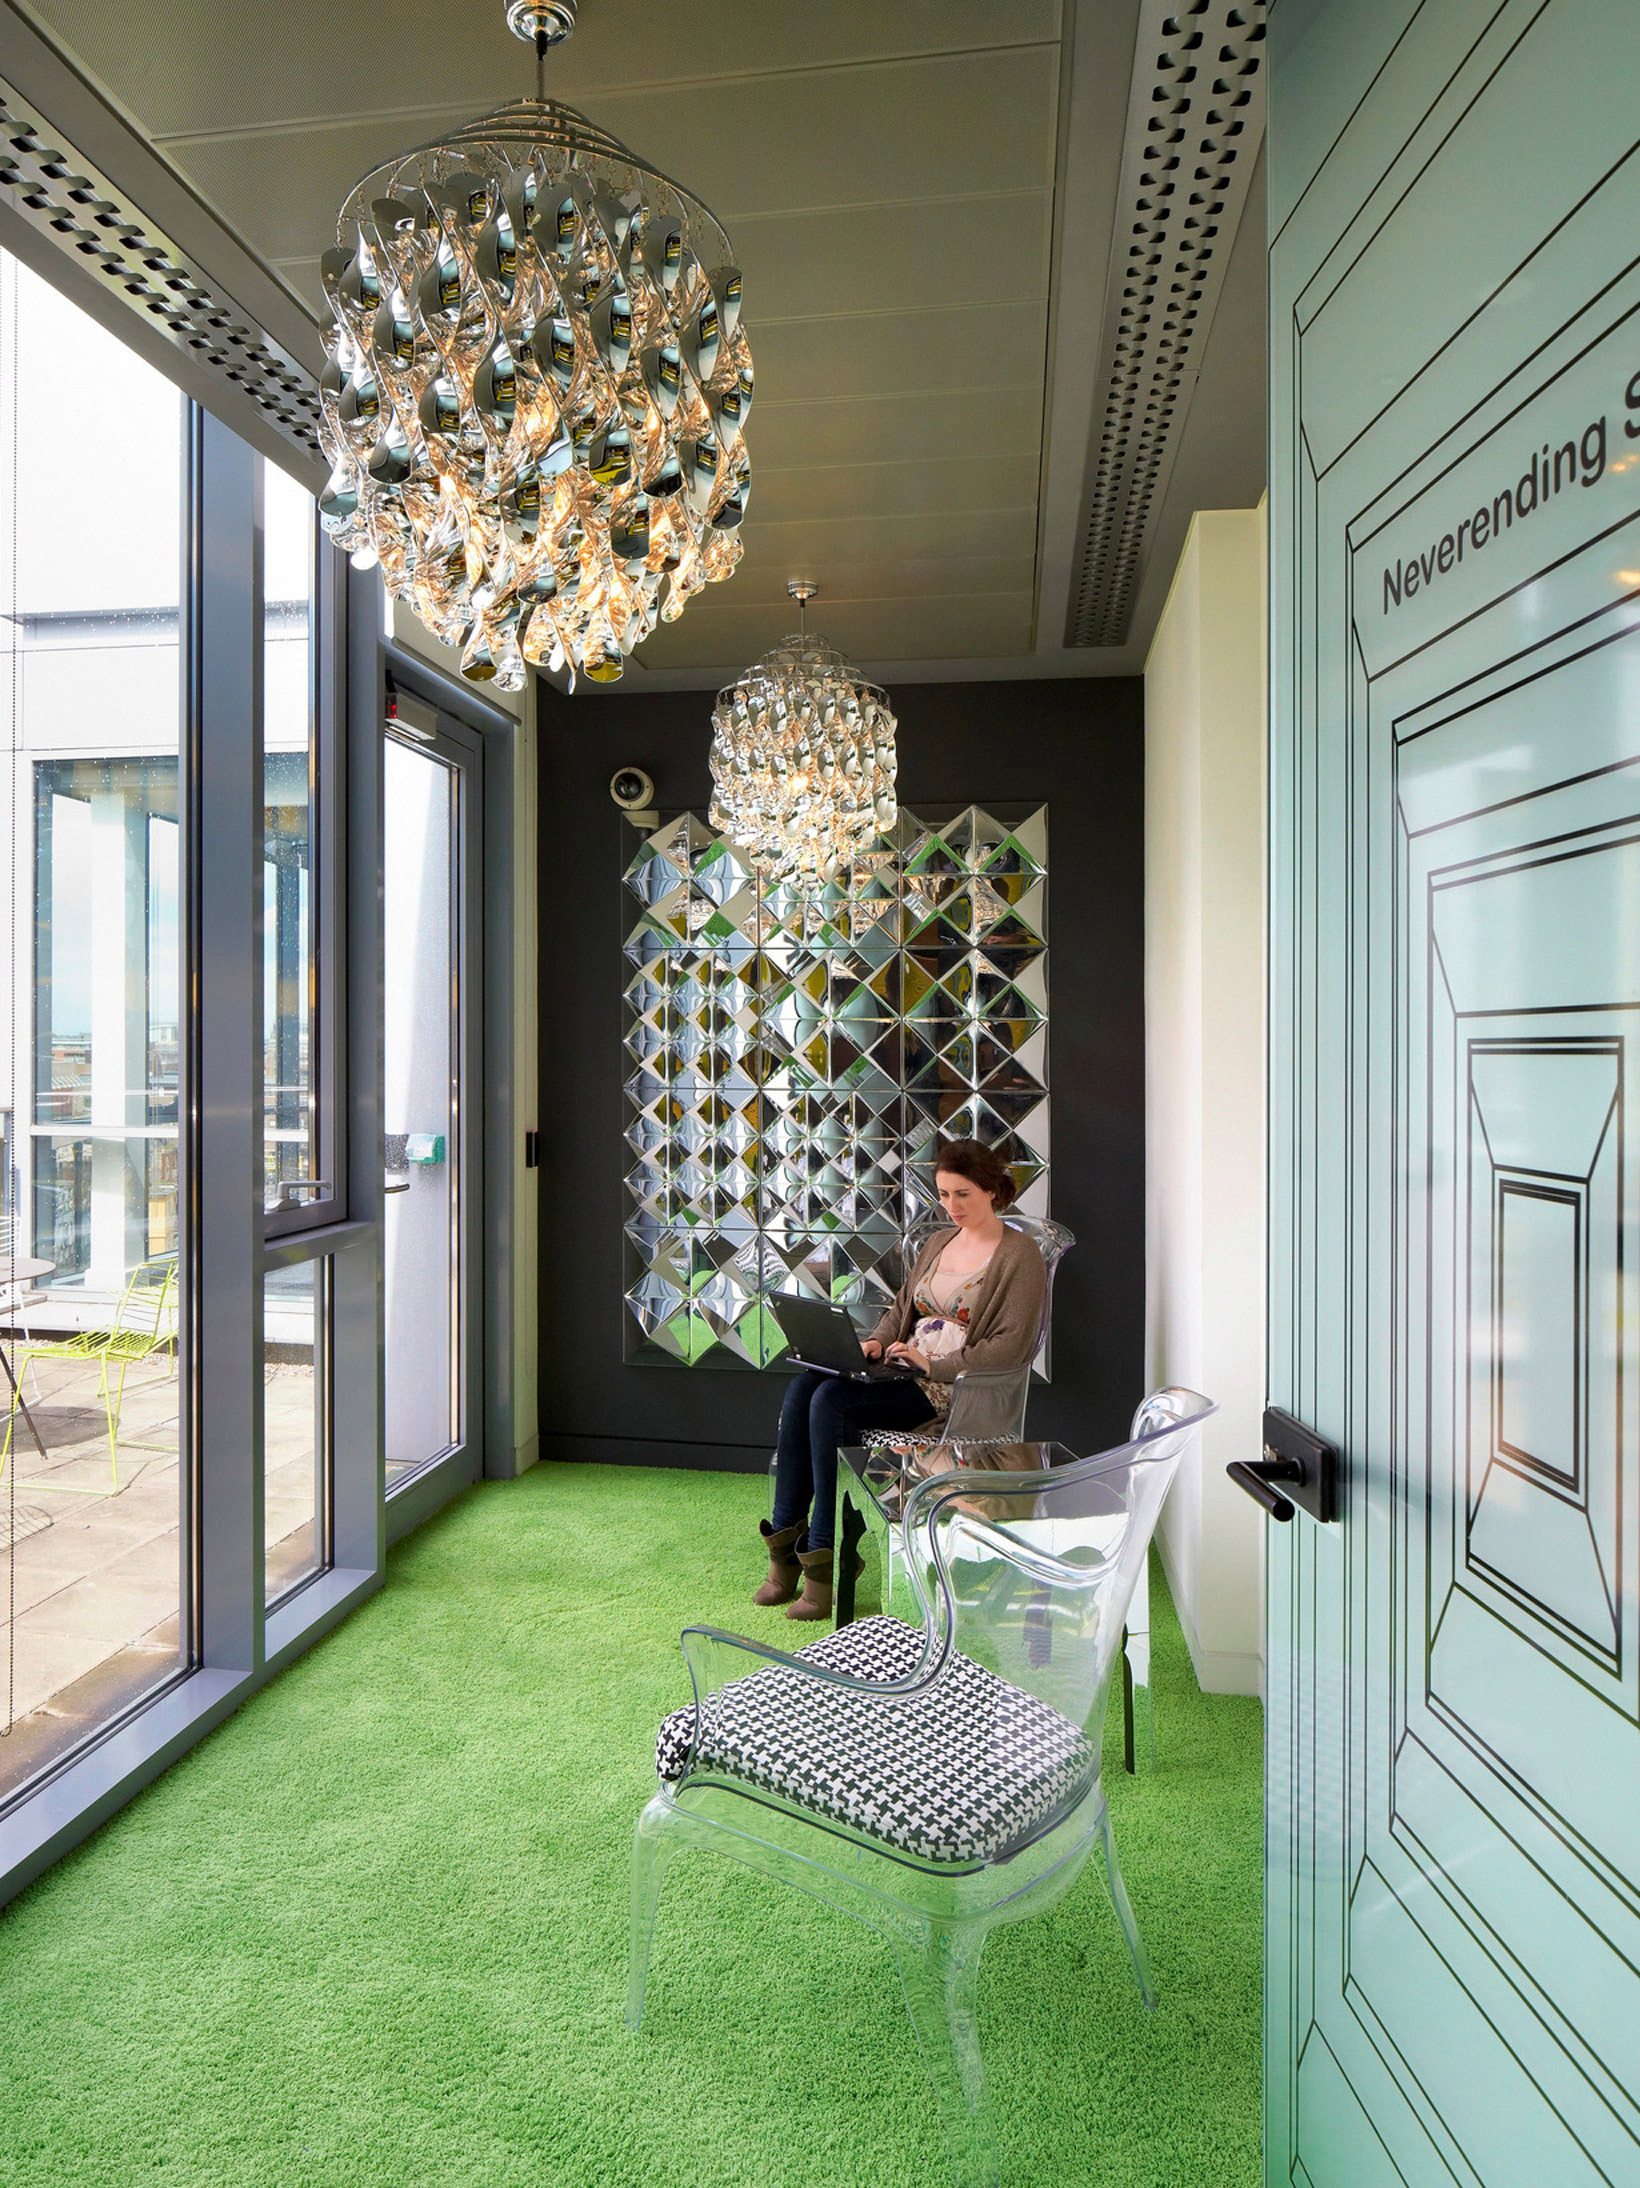 This office space features a vibrant green carpet with a geometric pattern, a large ornate pendant light, and a wall-mounted decorative light piece. A transparent chair with a black and white cushion is positioned by full-height windows, providing ample natural light. A person is seated, using a laptop.